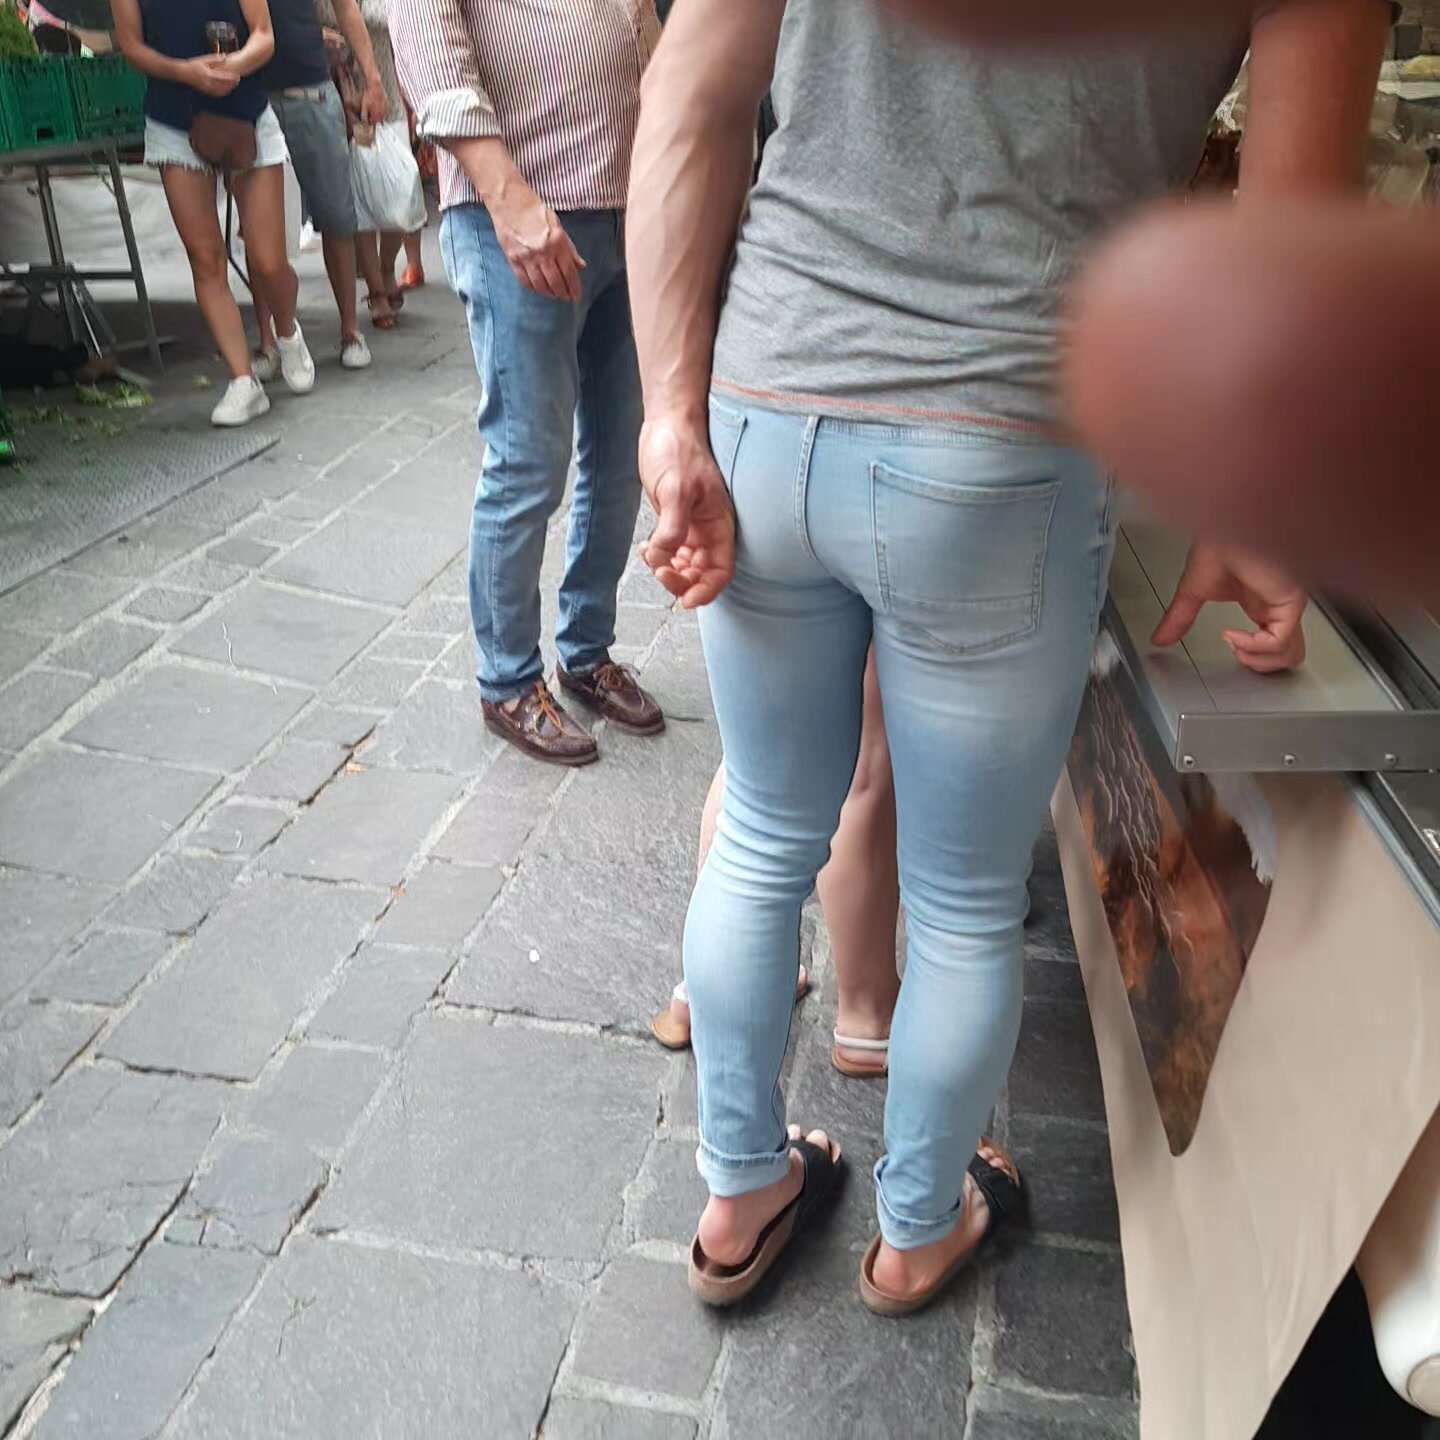 Butt on marché